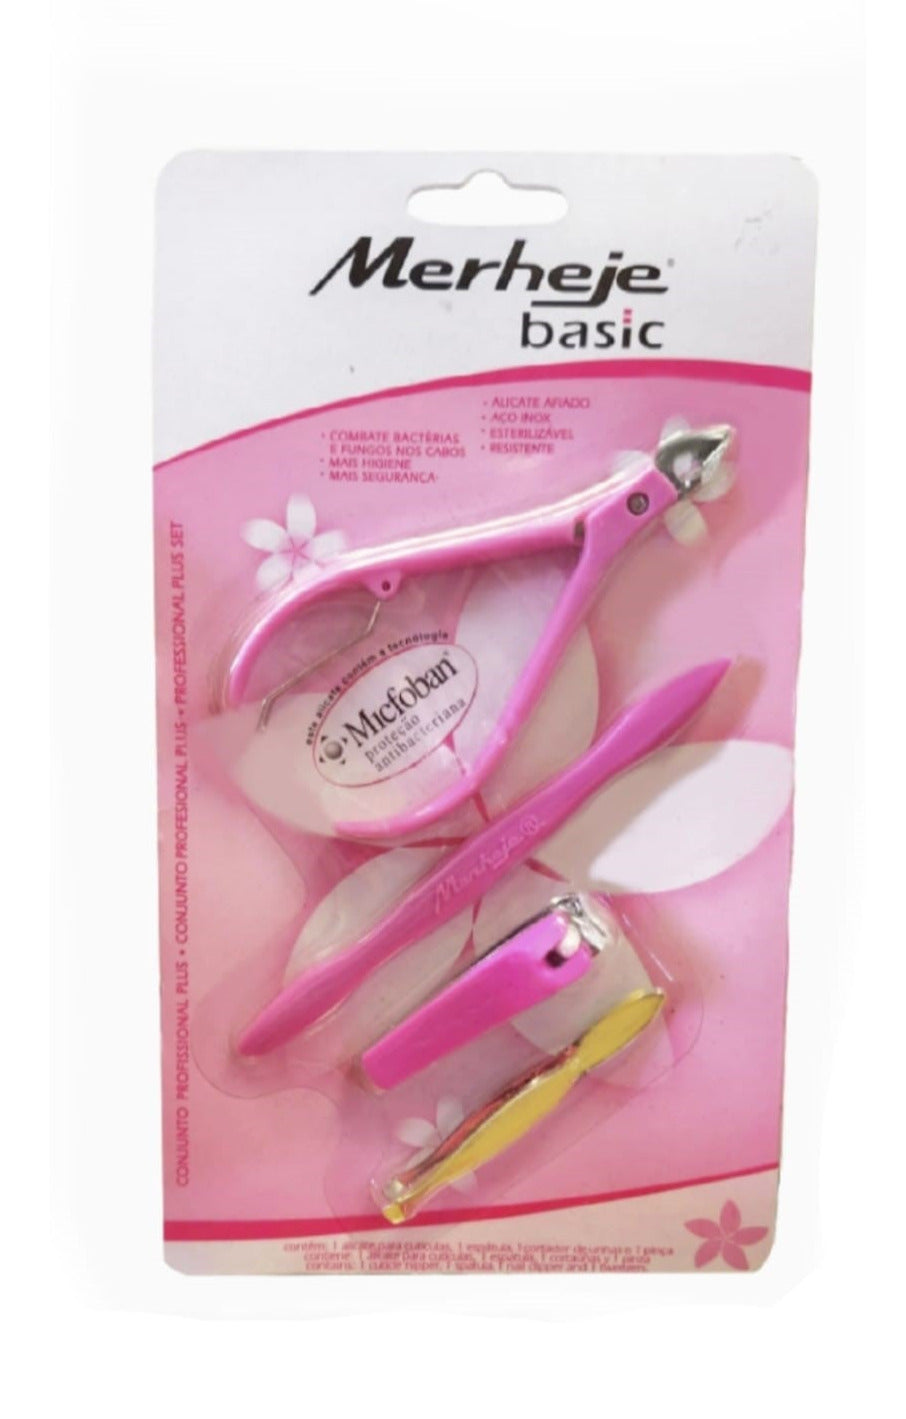 4 in 1 Professional Manicure kit | Facial care & Hand care By Merheje & Bic